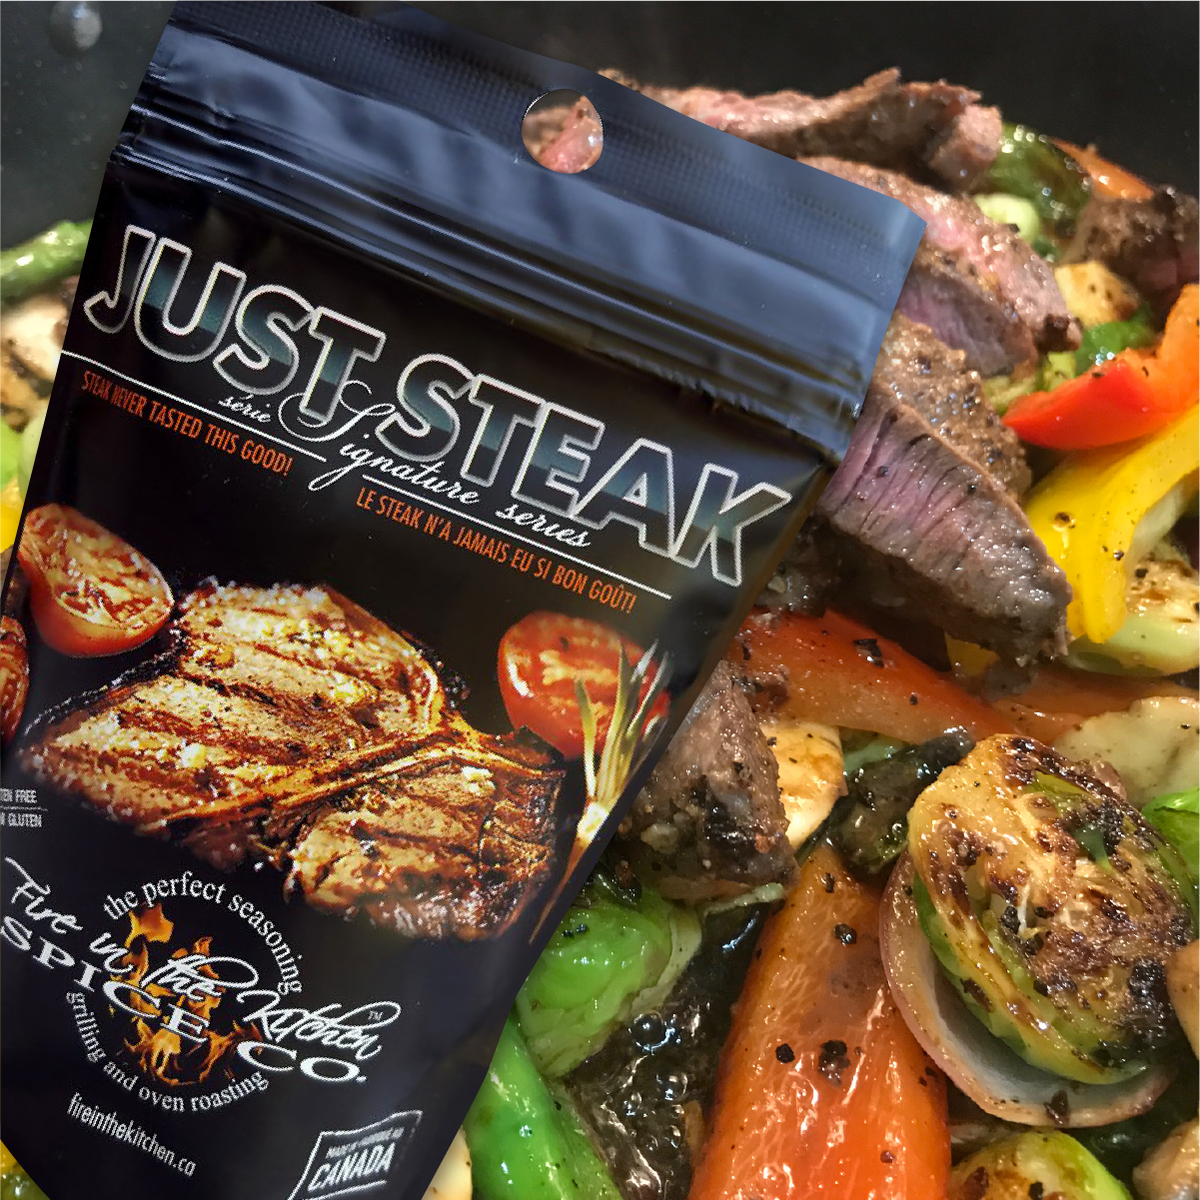 The perfect compliment to a premium cut of steak! Half the sodium of the leading blend. 🍖 #juststeak ##instagood #instafood #dailyfoodfeed #dinner #delish #eat #foodie #cookingwithspices #gourmet #foodporn #foodgasm #nom #nomnom #nomnomnom #Chefmode #foodstagram